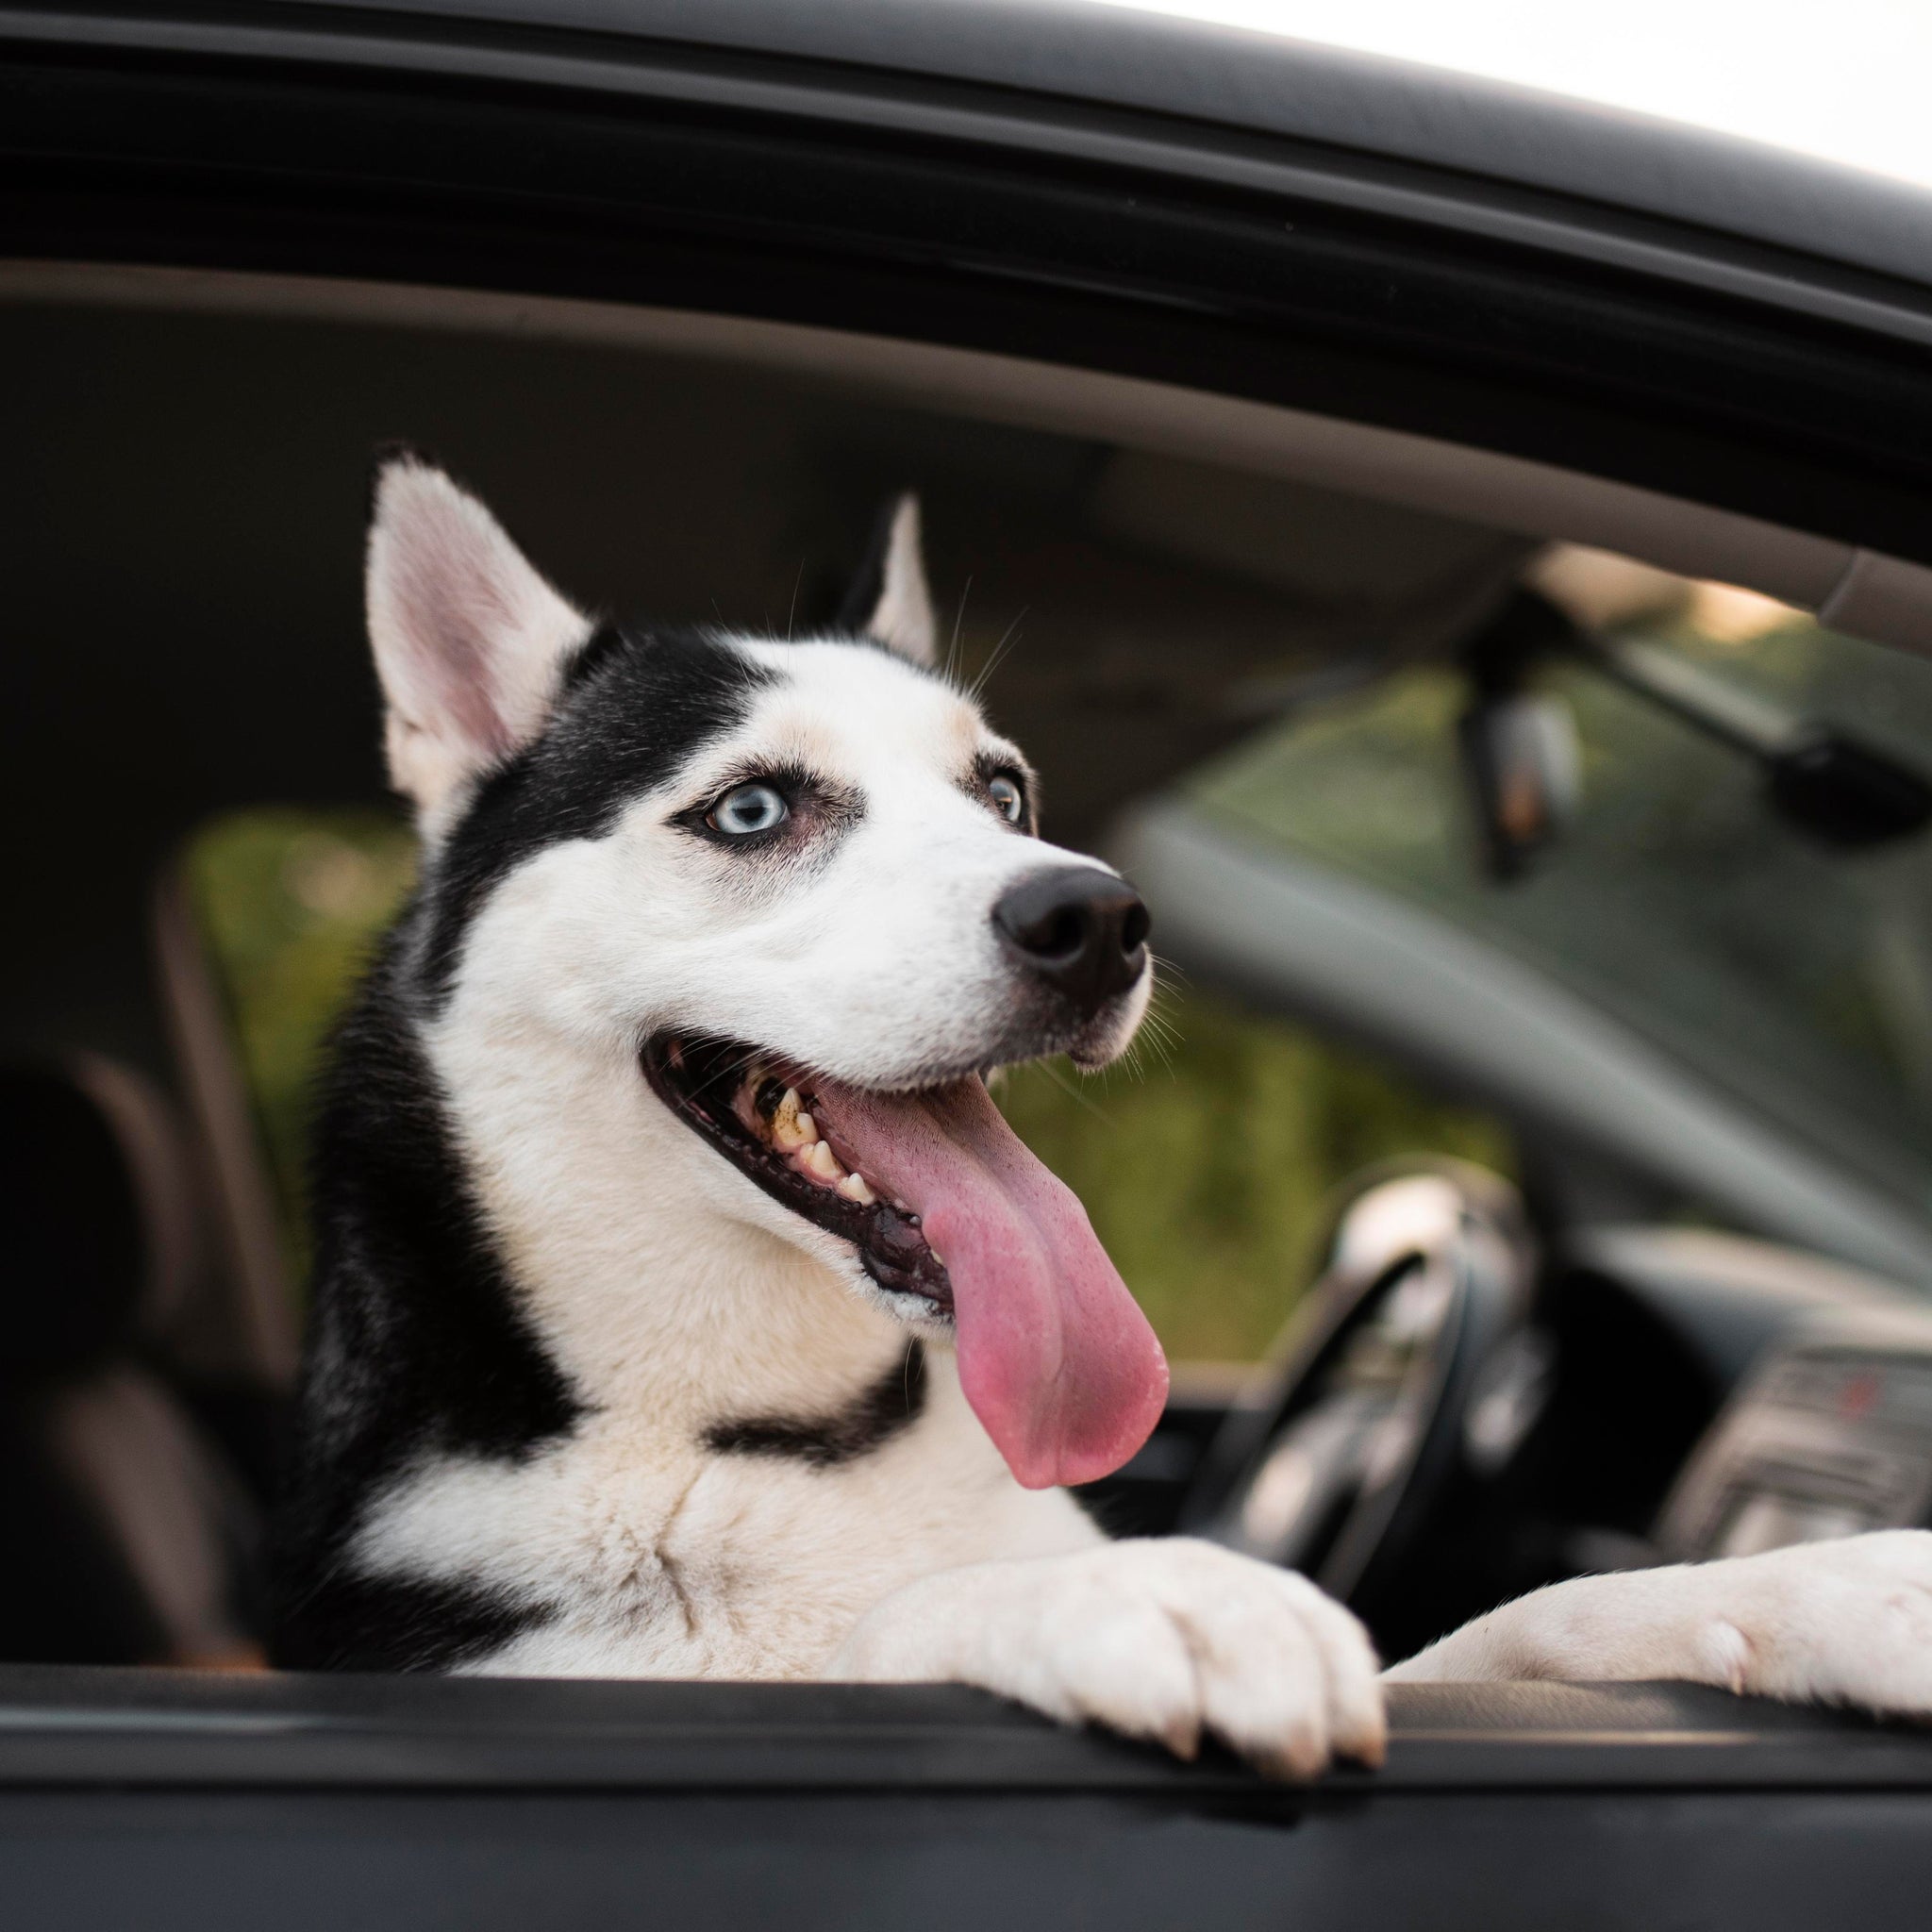 Ensuring Safe Travel for Your Furry Friend: A Guide to Pet Car Safety Preparation